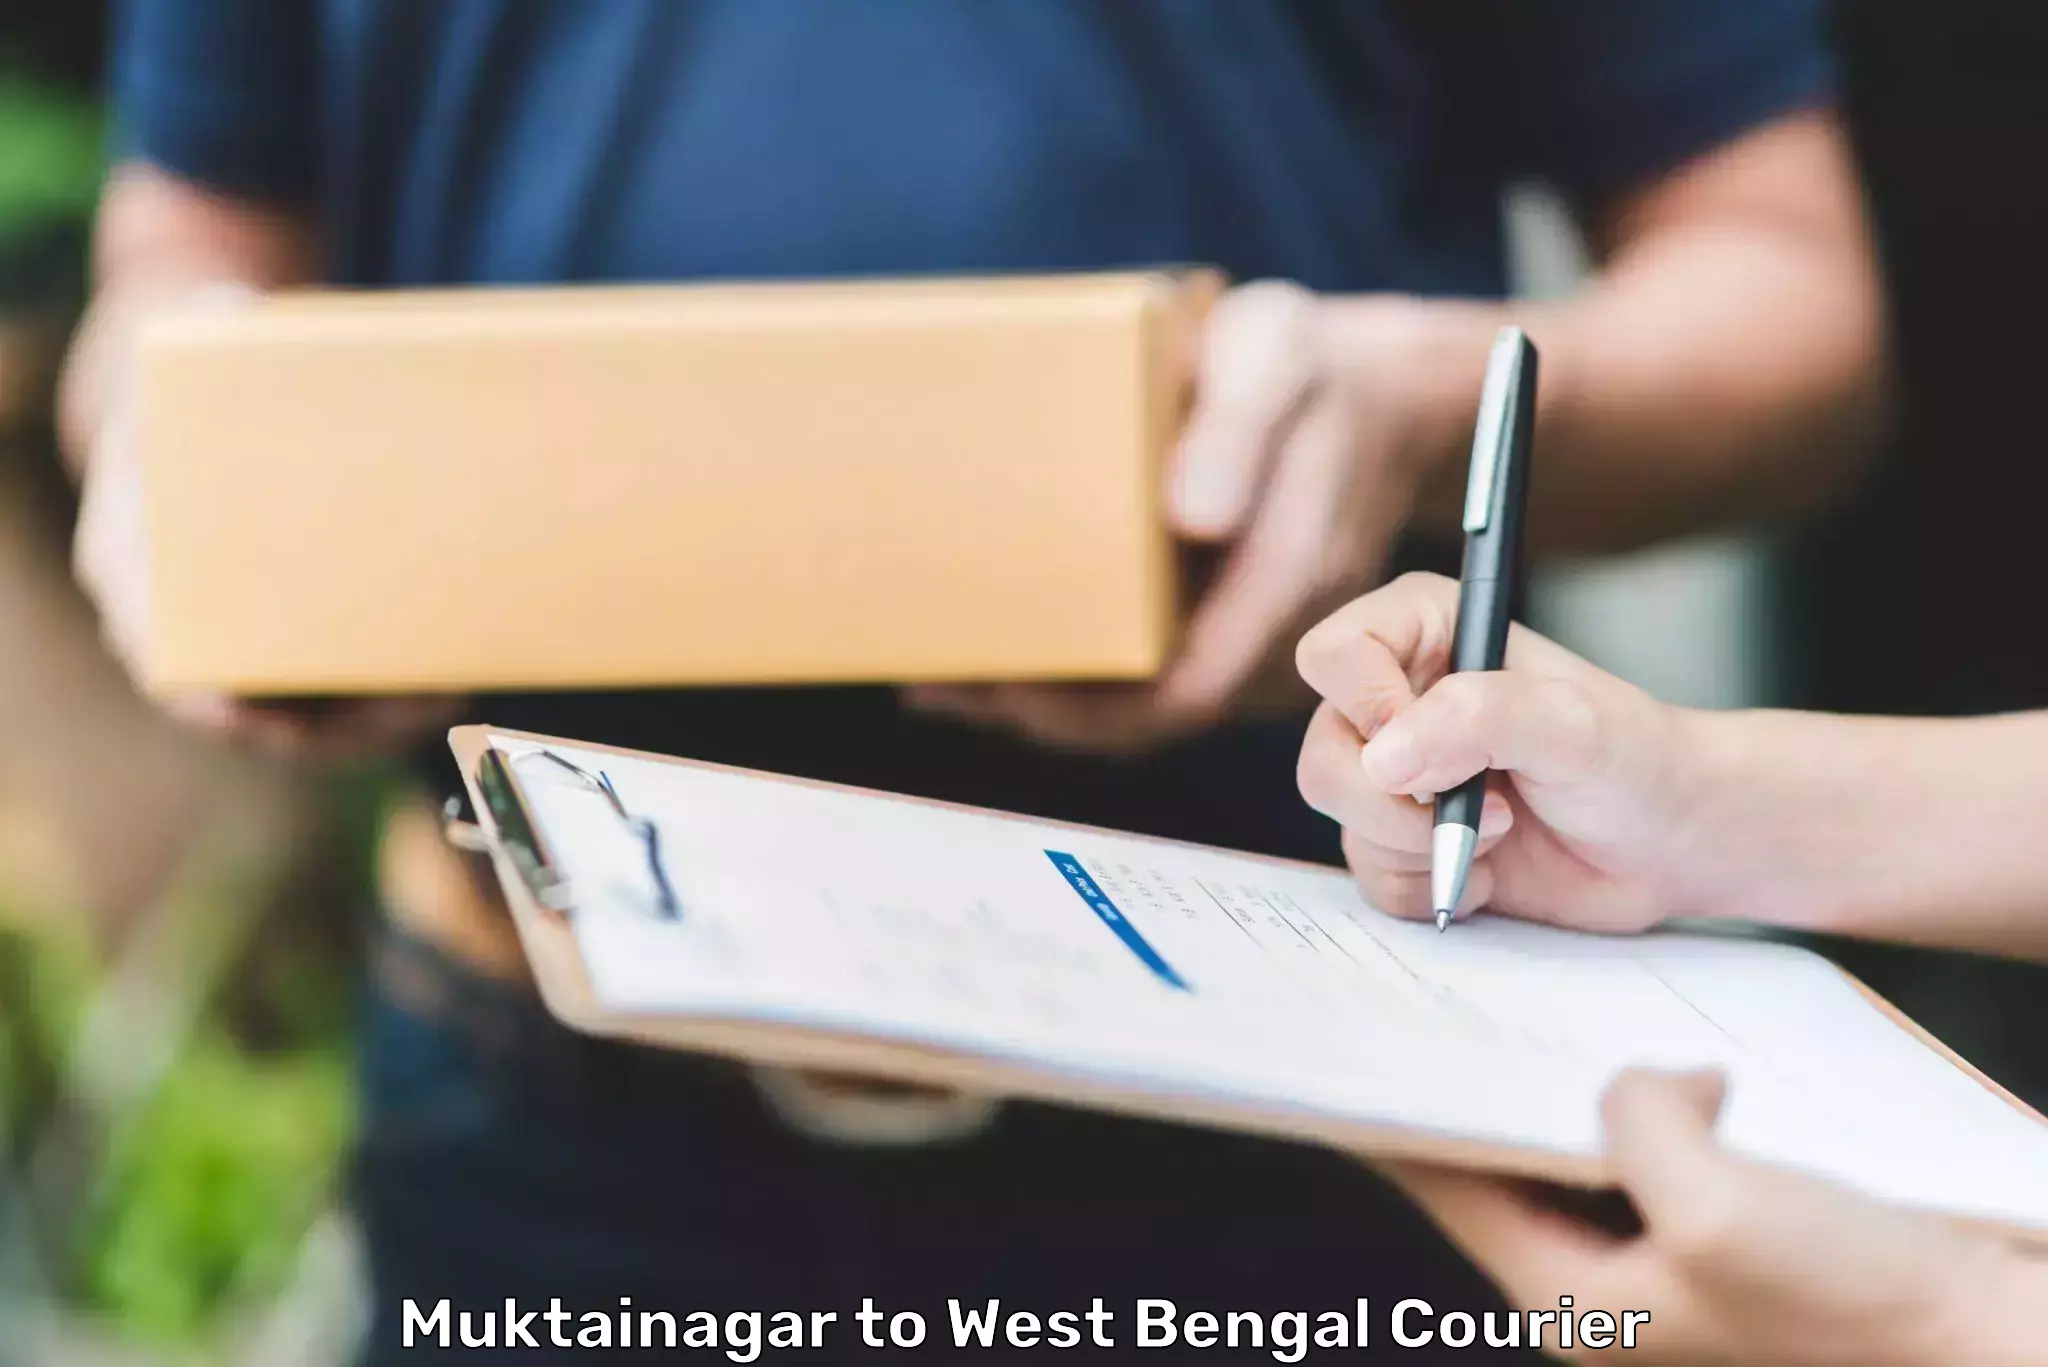 State-of-the-art courier technology Muktainagar to West Bengal